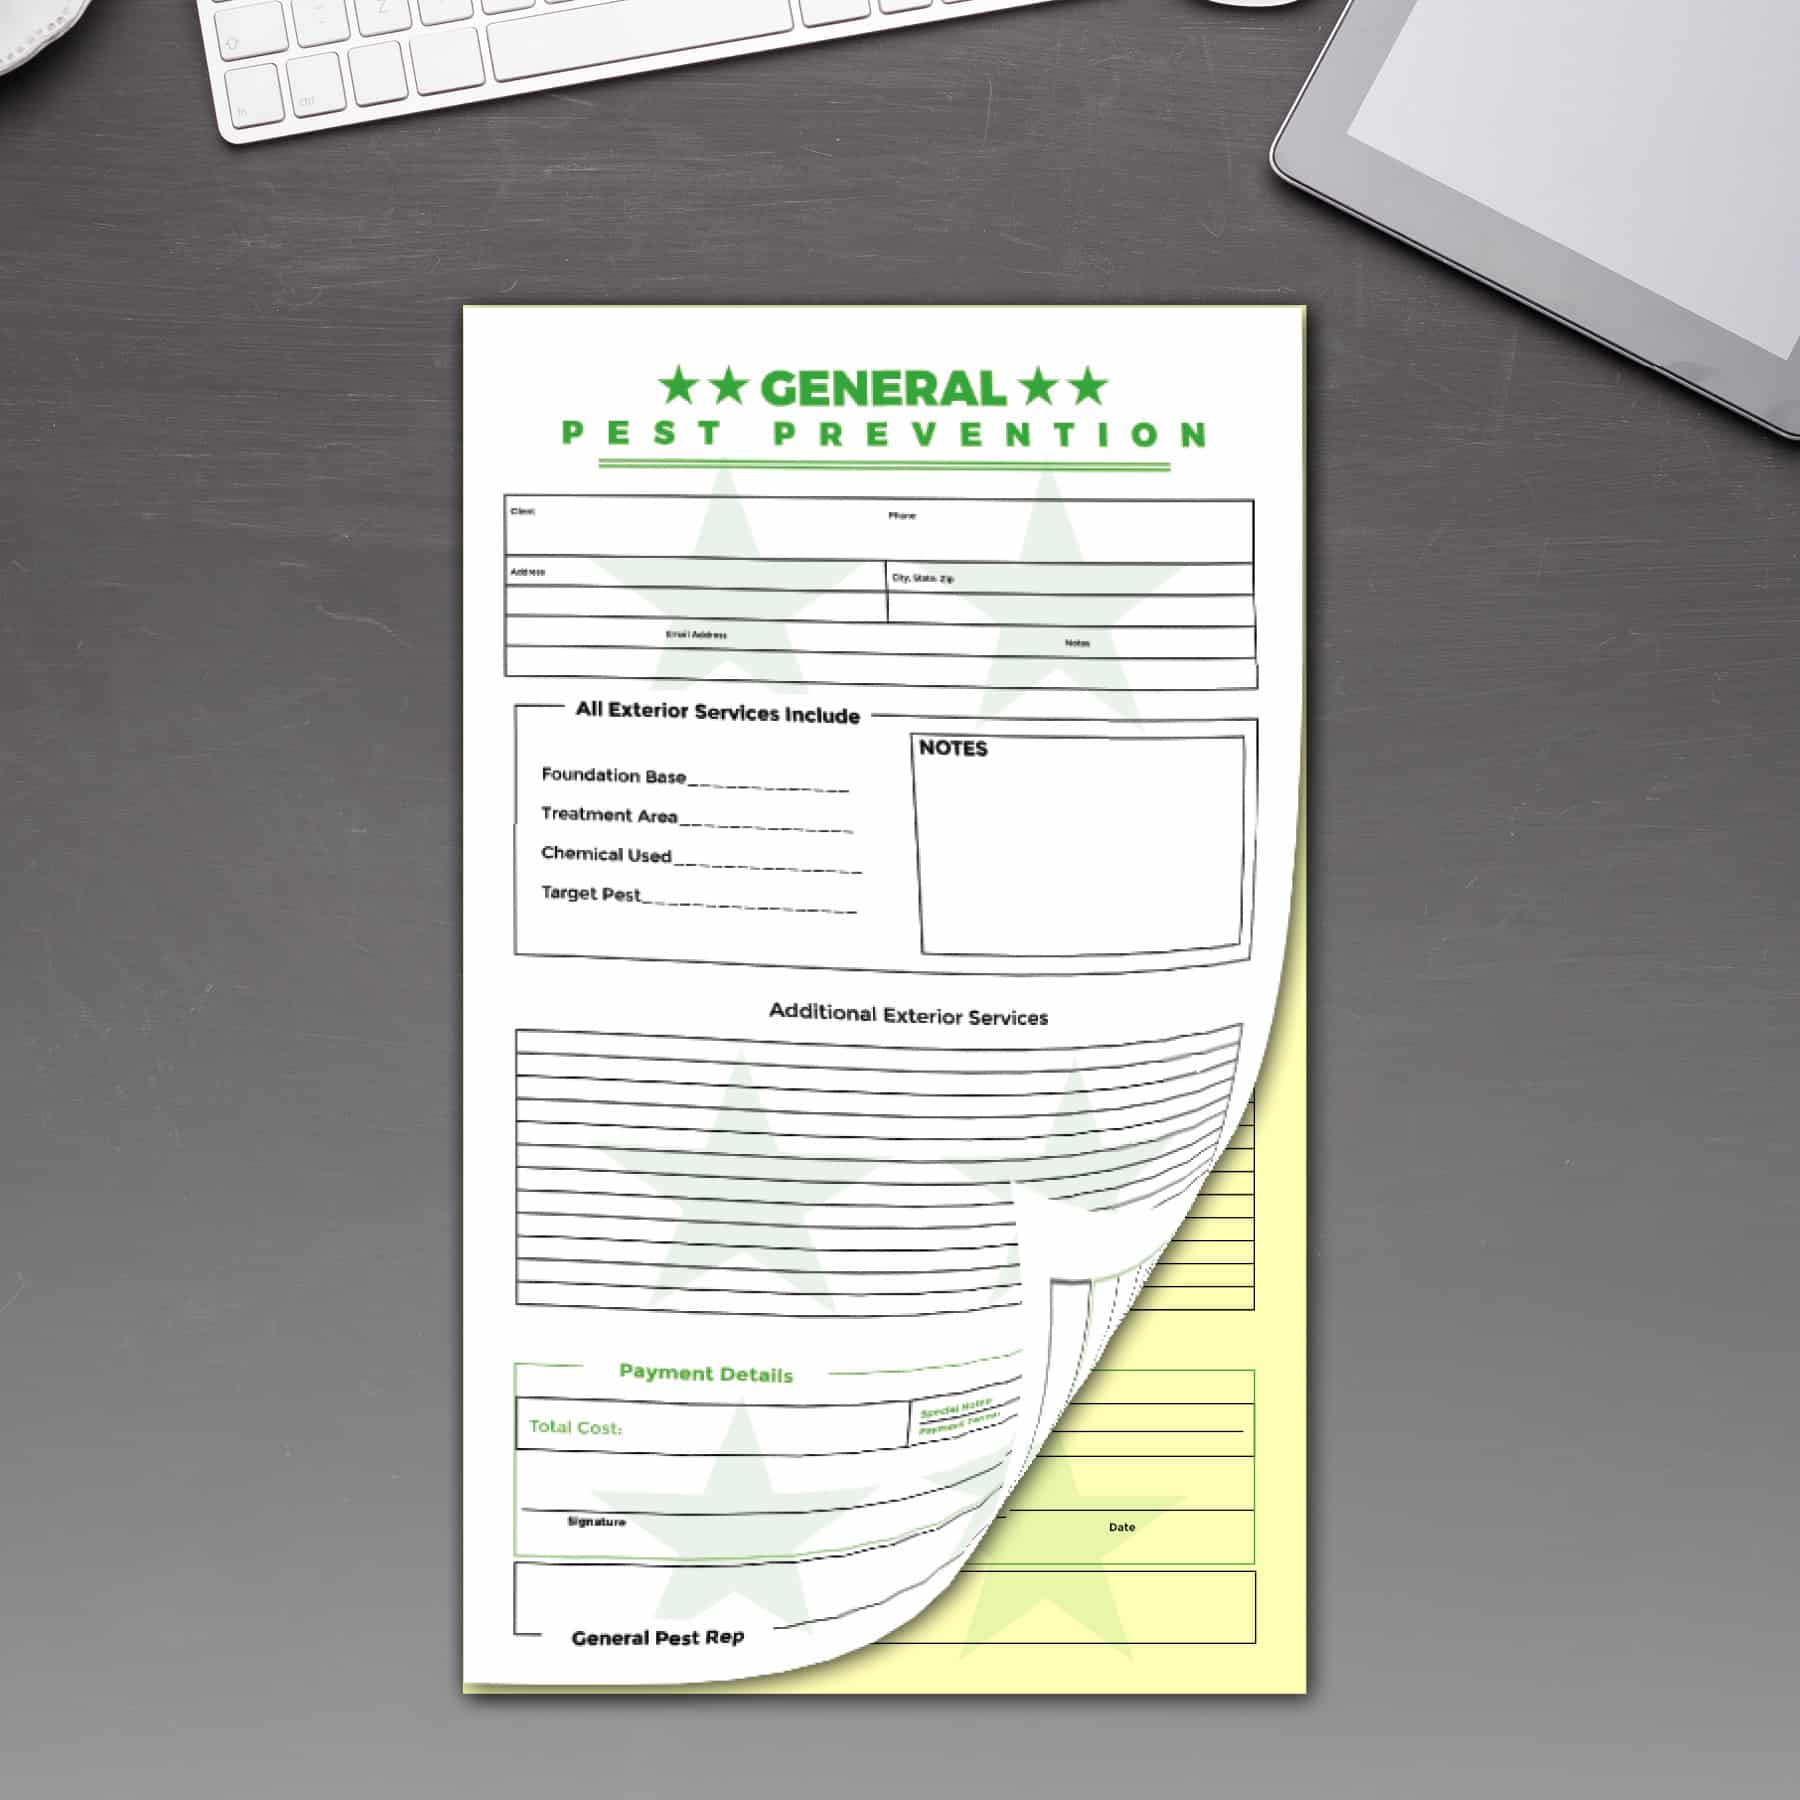 5 x A4 PRINTED 2 PART NCR INVOICE ESTIMATE PADS WITH FREE DELIVERY! ORDER 